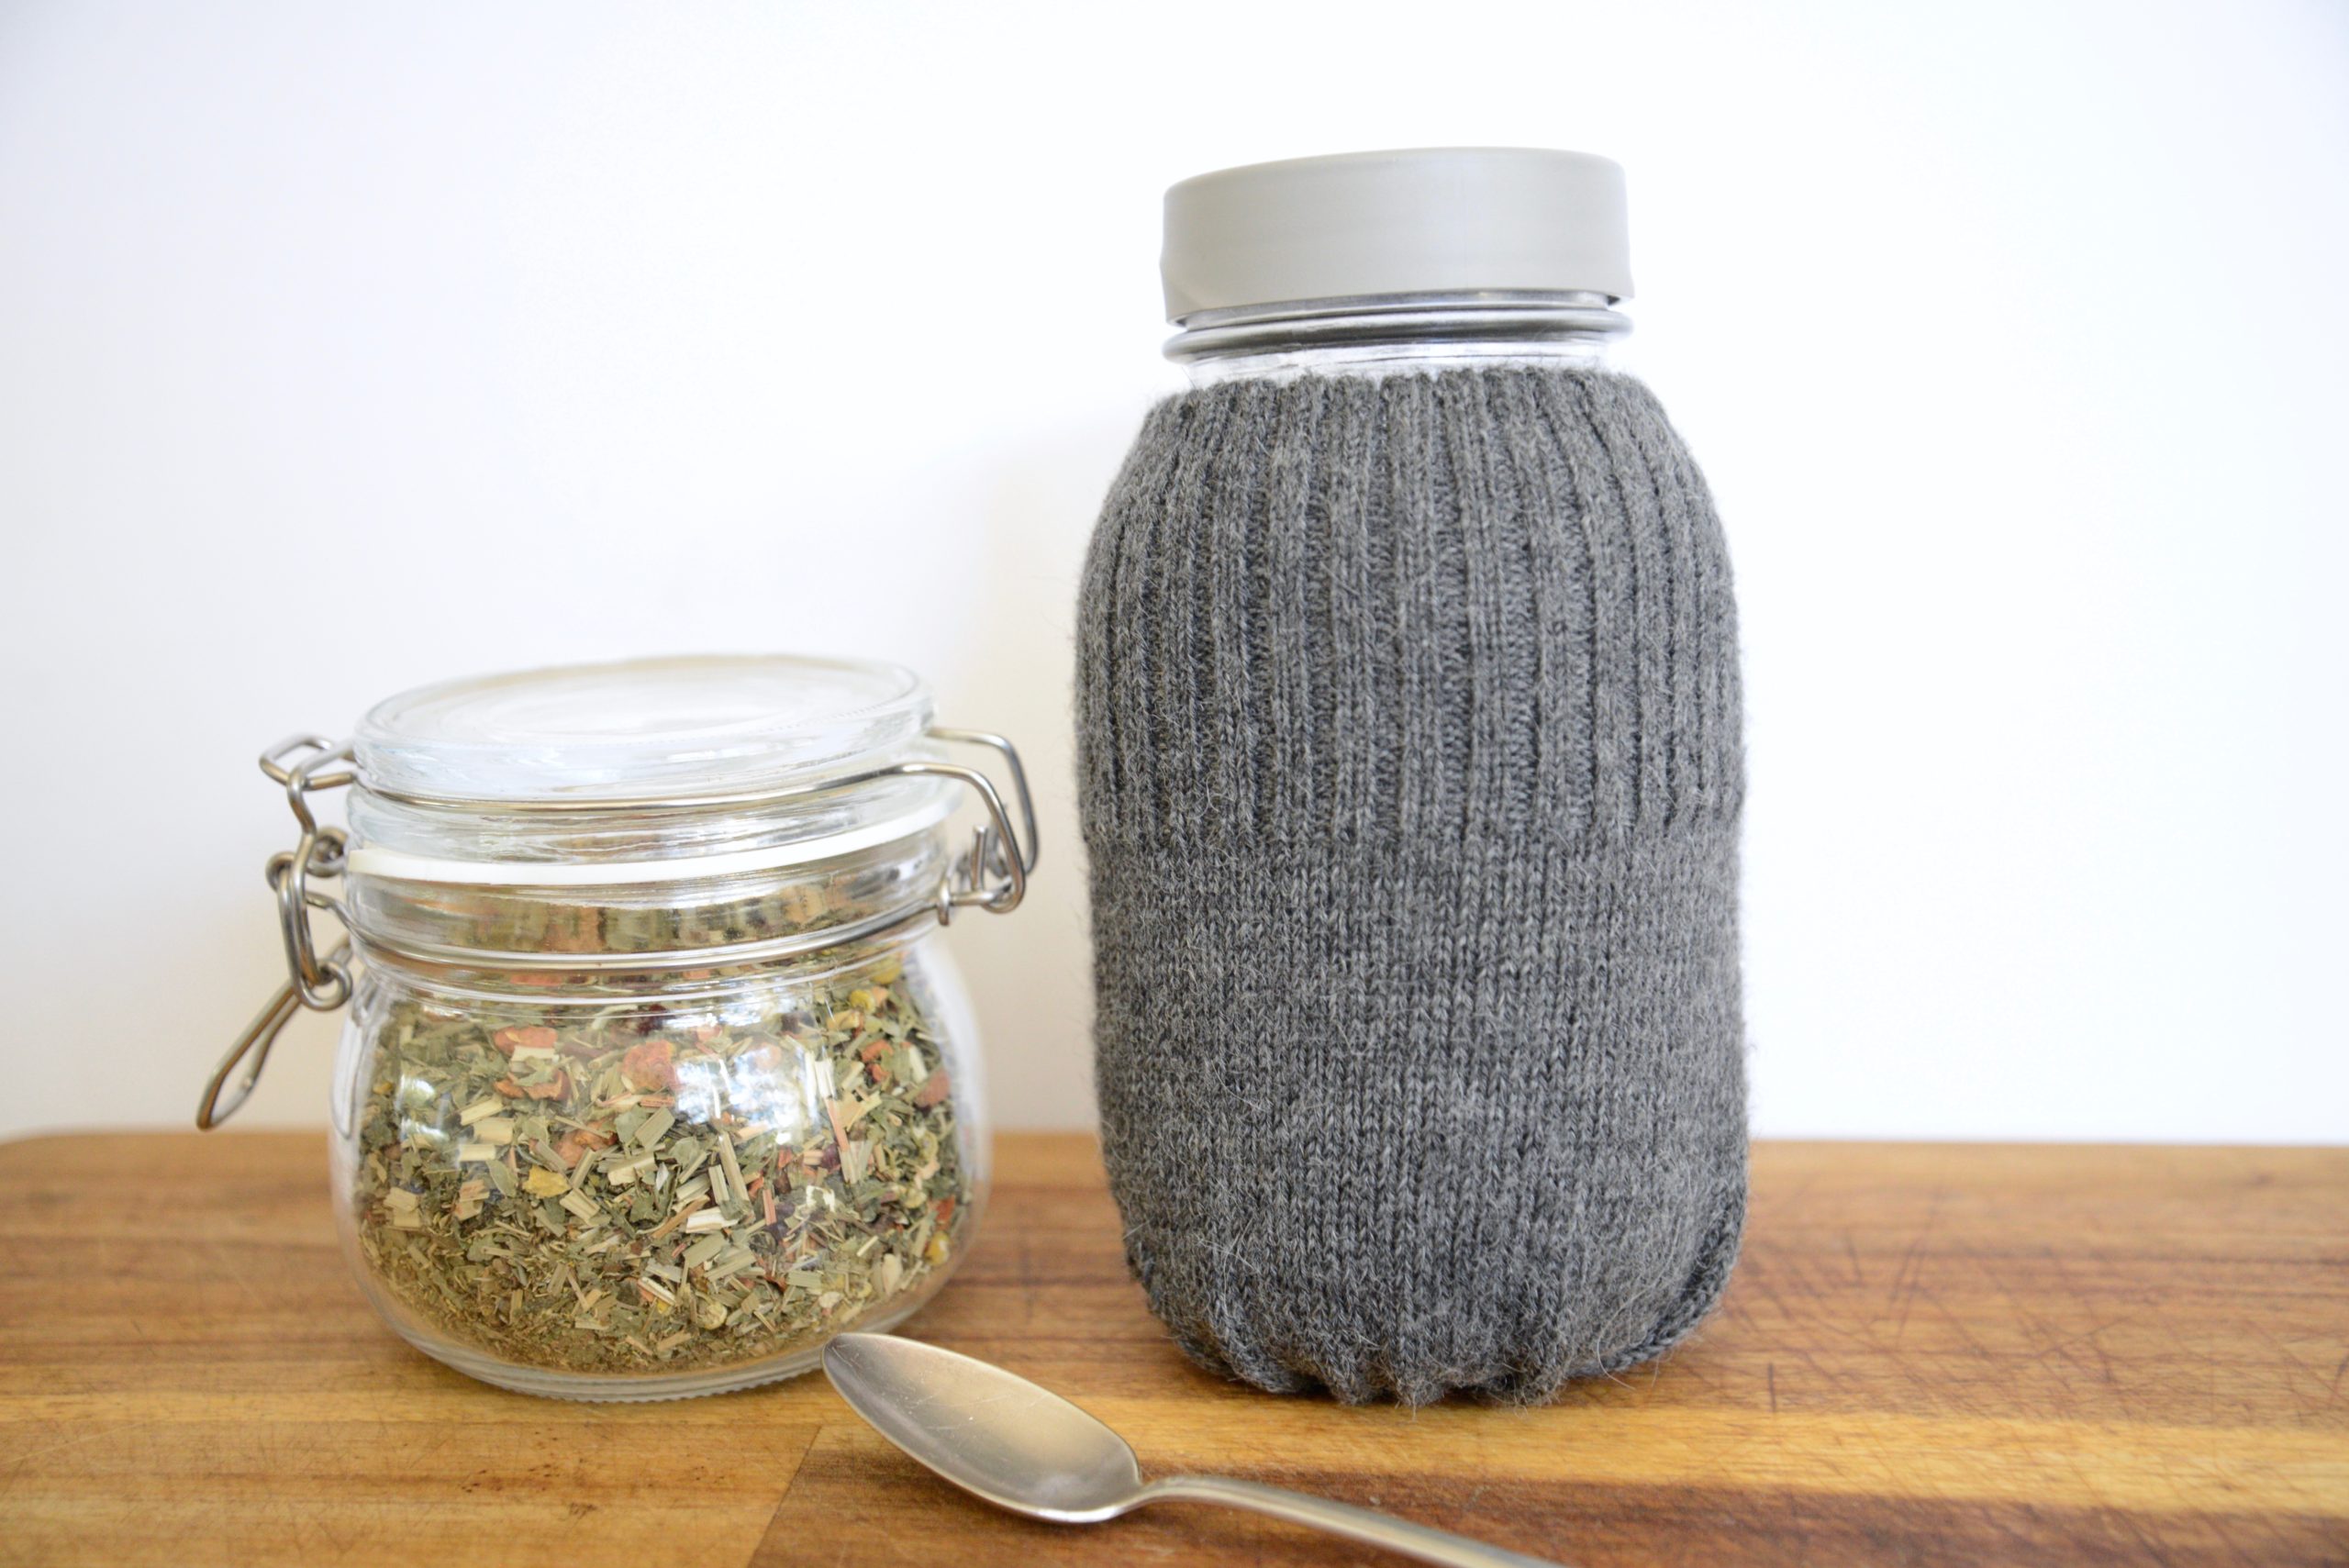 How to Make a Mason Jar Cozy from an Old Sweater